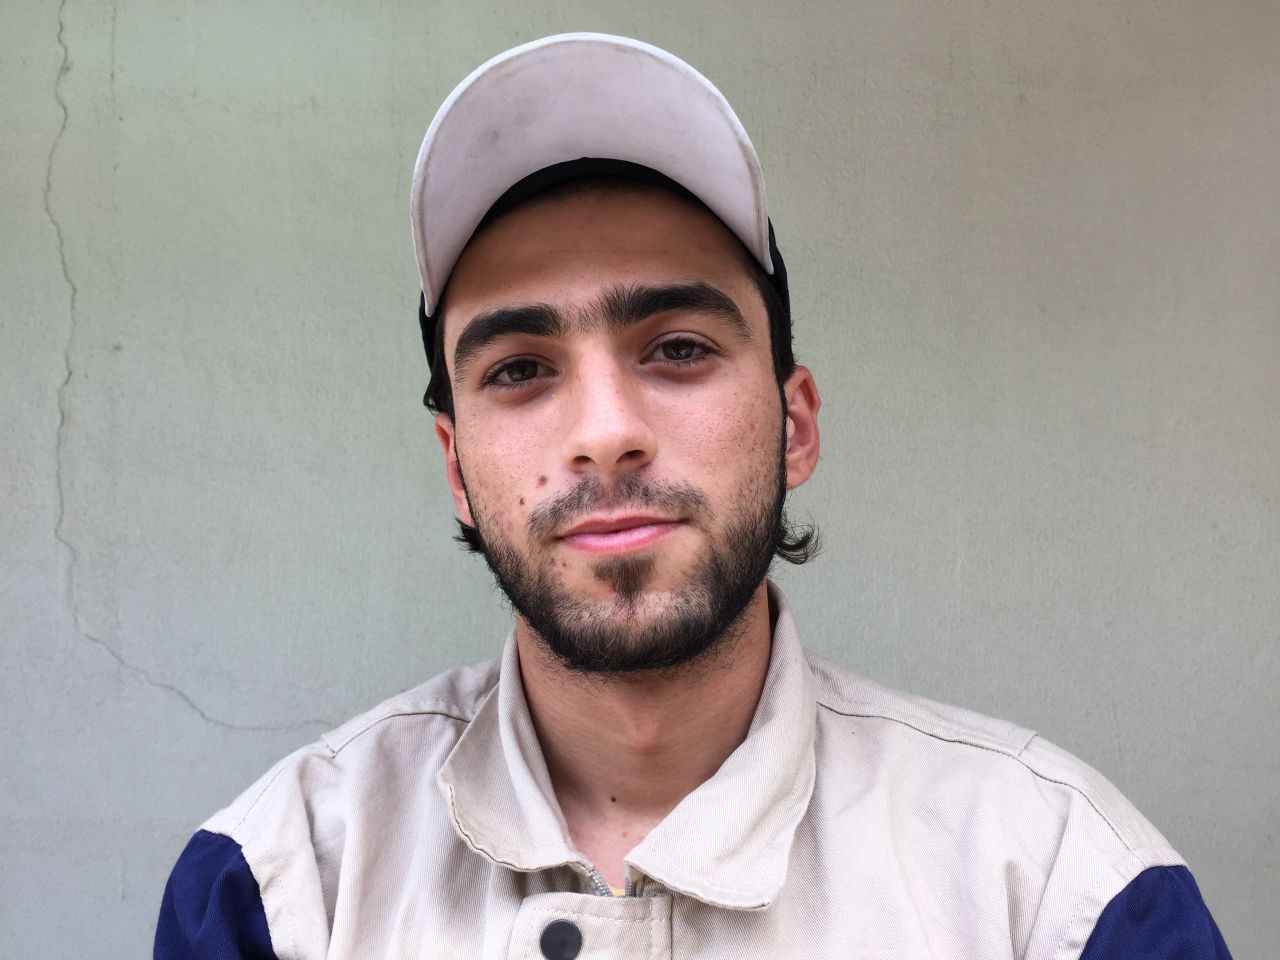 Mahmoud Staify, 20. Was about to start high school. "Idlib was being heavily bombed when it got out from under regime control. We arrived at the end of a tunnel that was so small you could only move the dust with your hands. We found a 60-year-old man alive in the basement, and spent 6 hours getting him out."